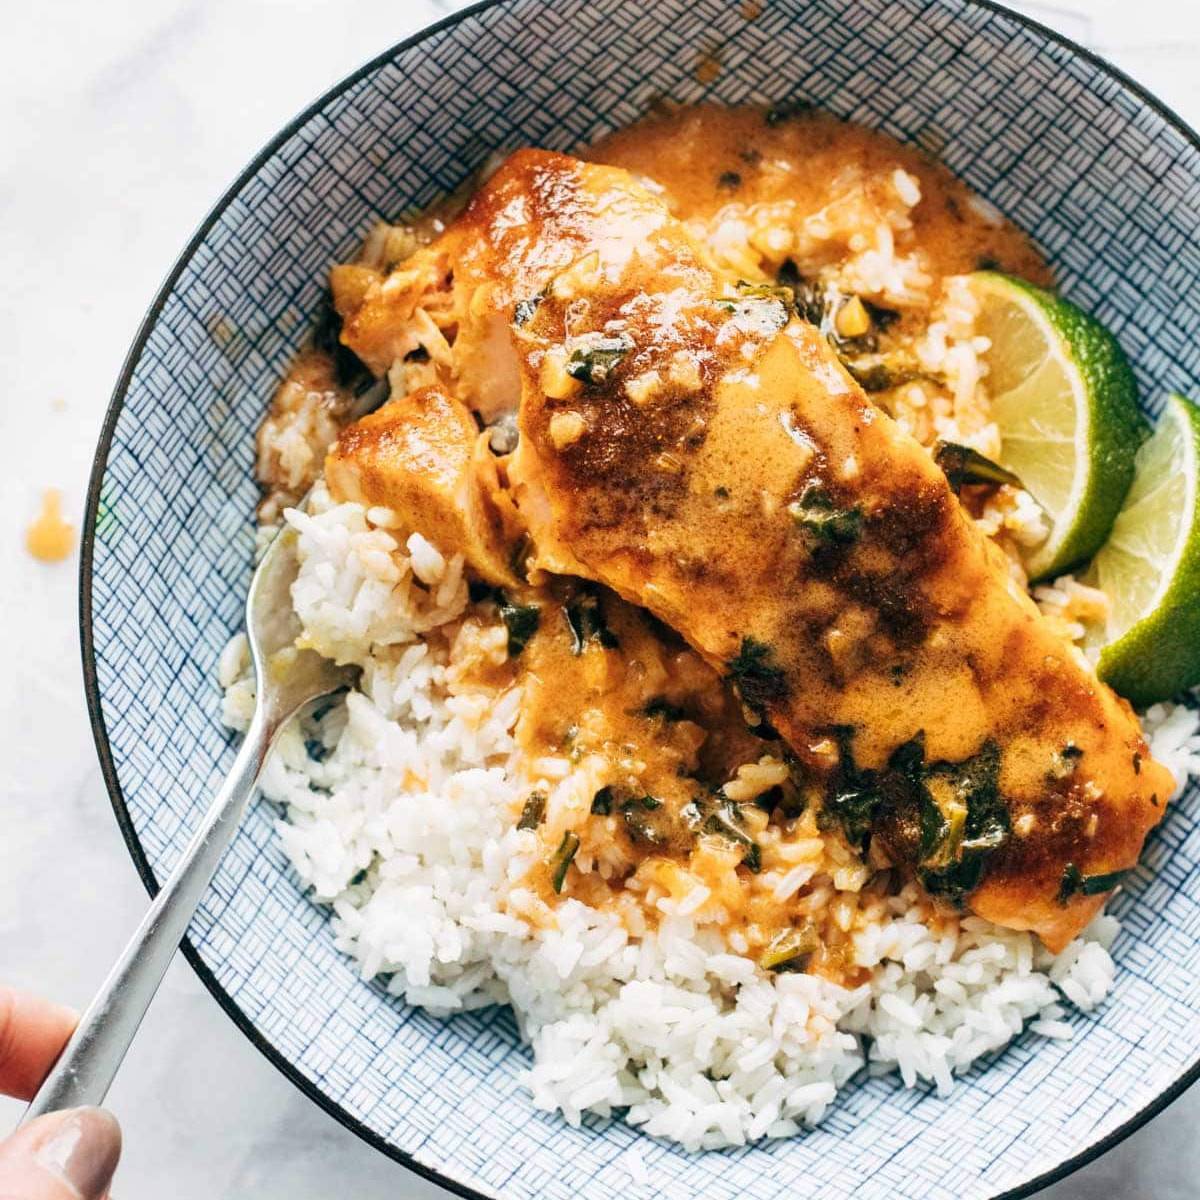 A meal of salmon, rice and curry sauce in a bowl.